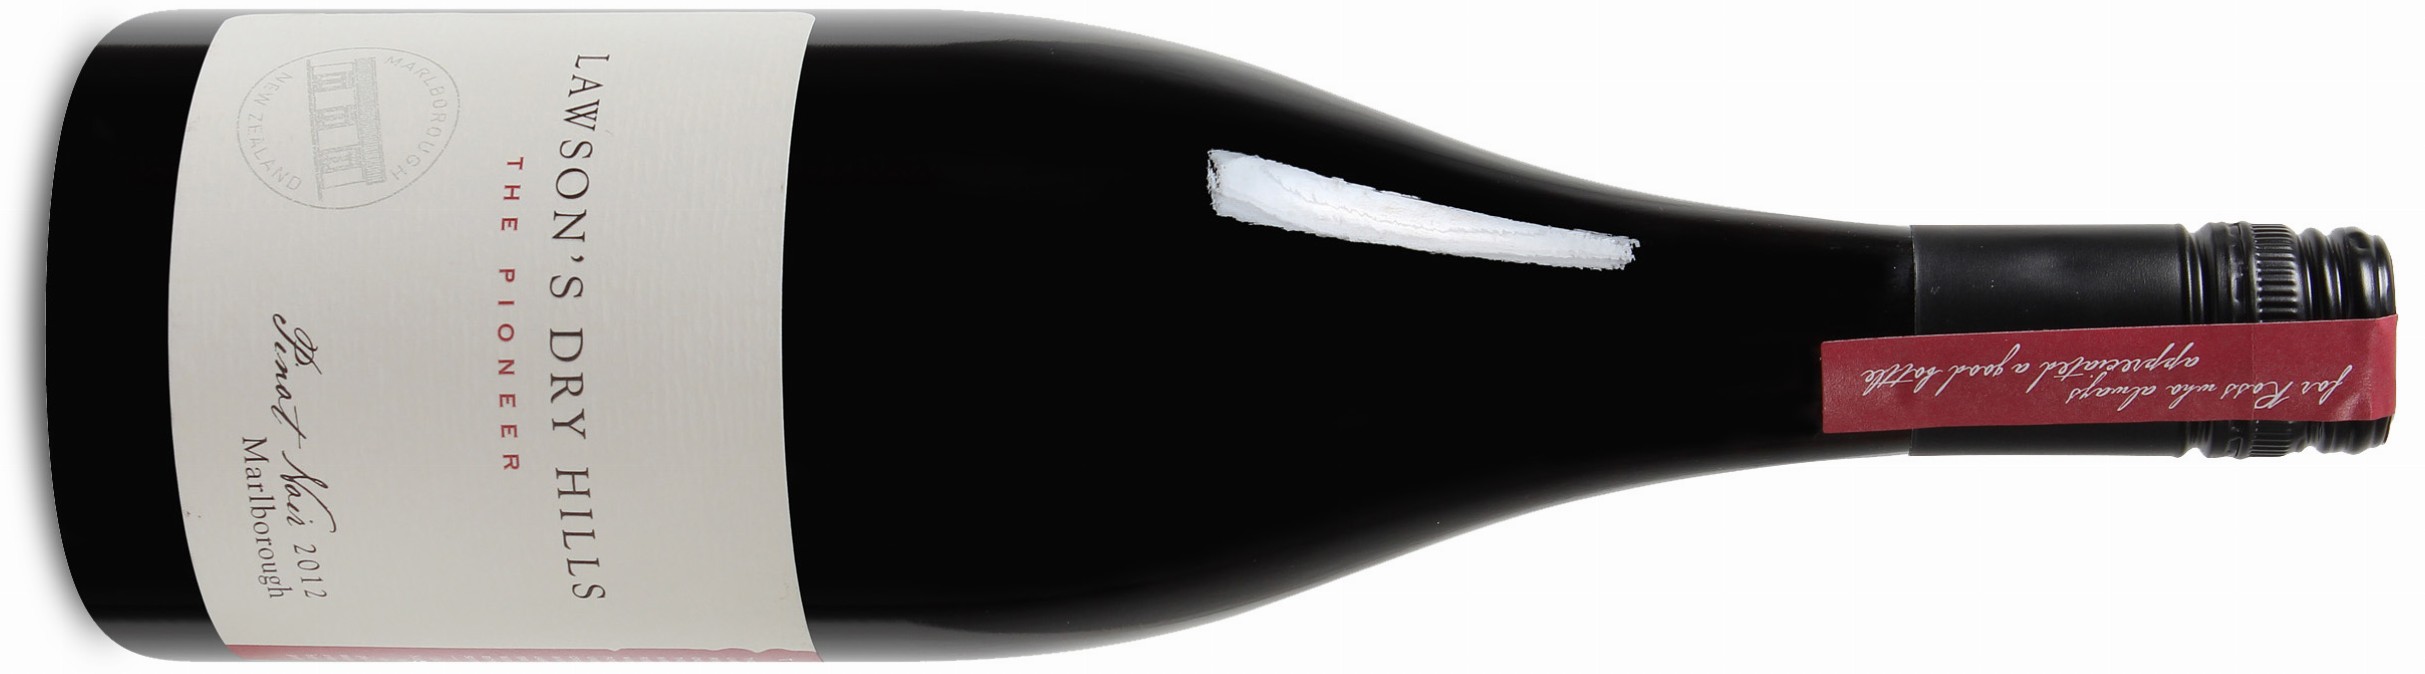 Lawson's Dry Hills The Pioneer Pinot Noir 2012